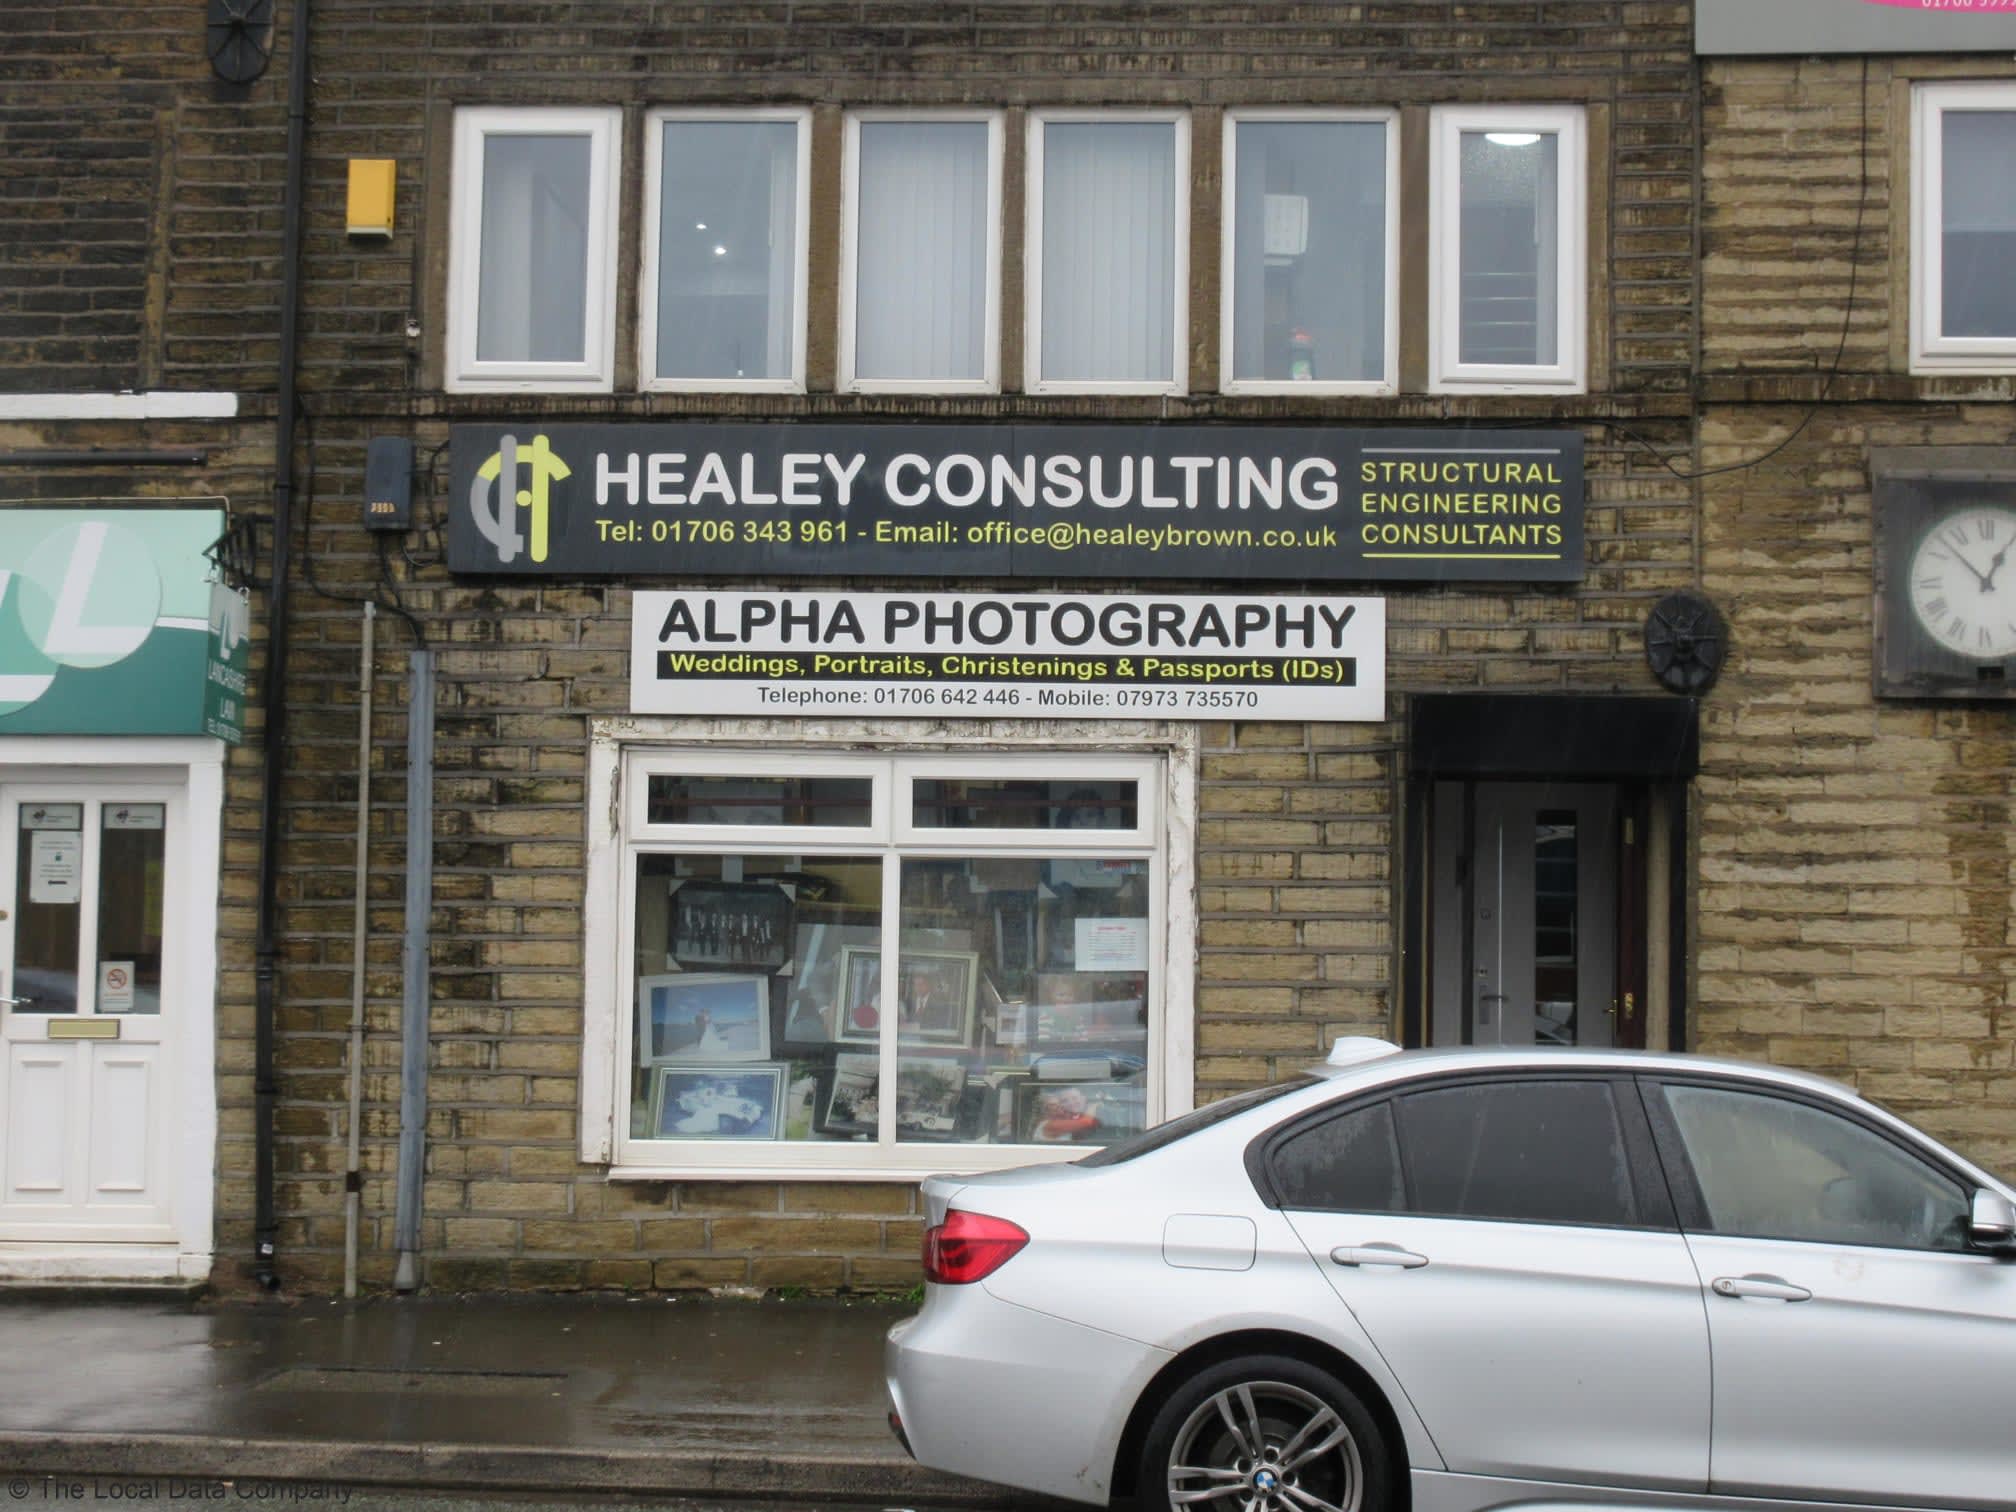 Images Healey Consulting